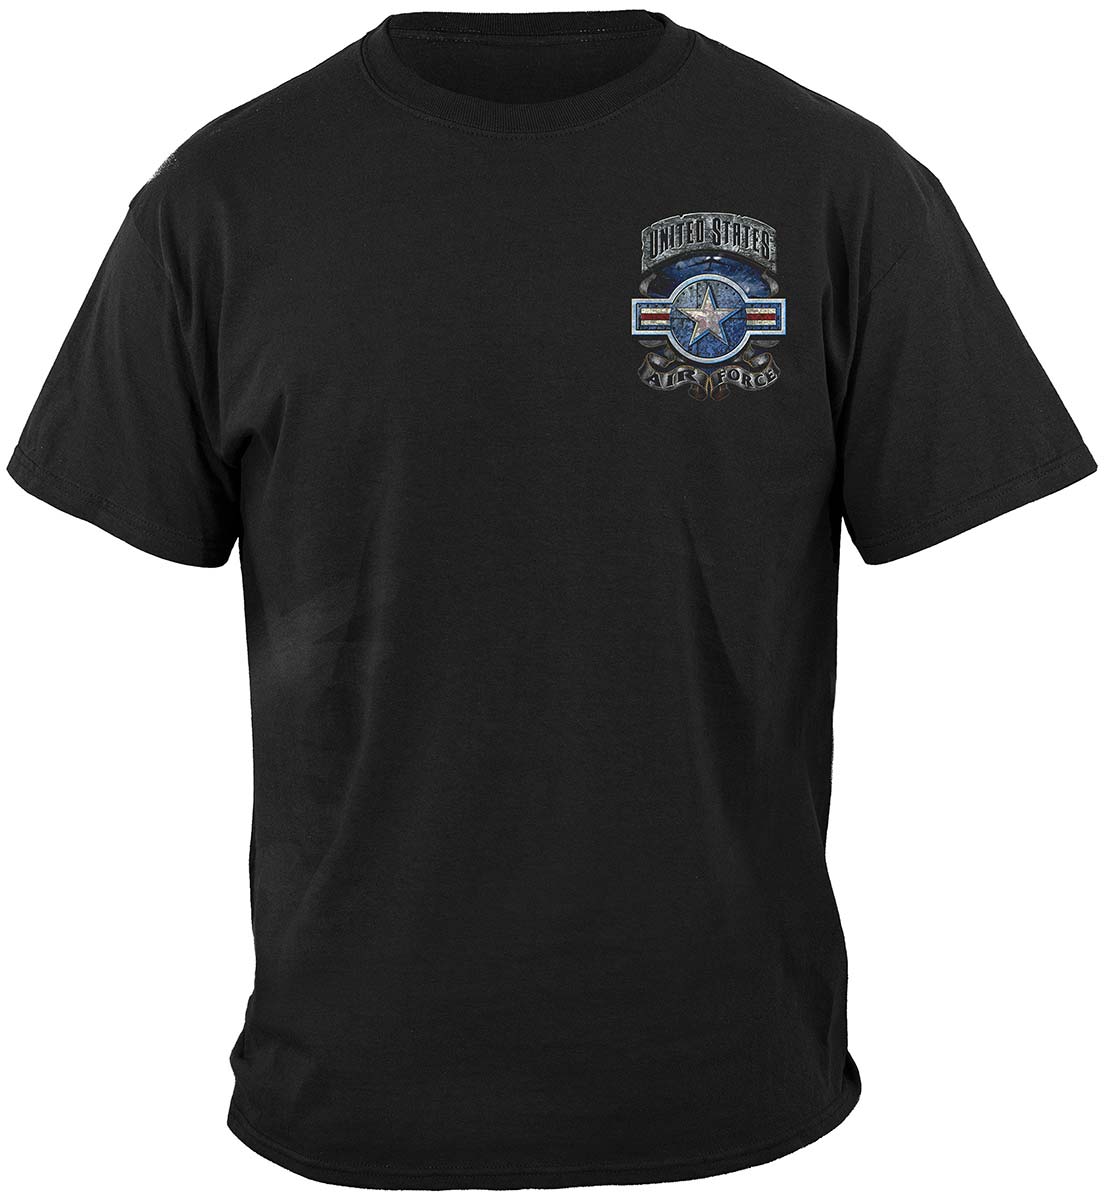 Air Force In Stone One Star Premium Long Sleeves